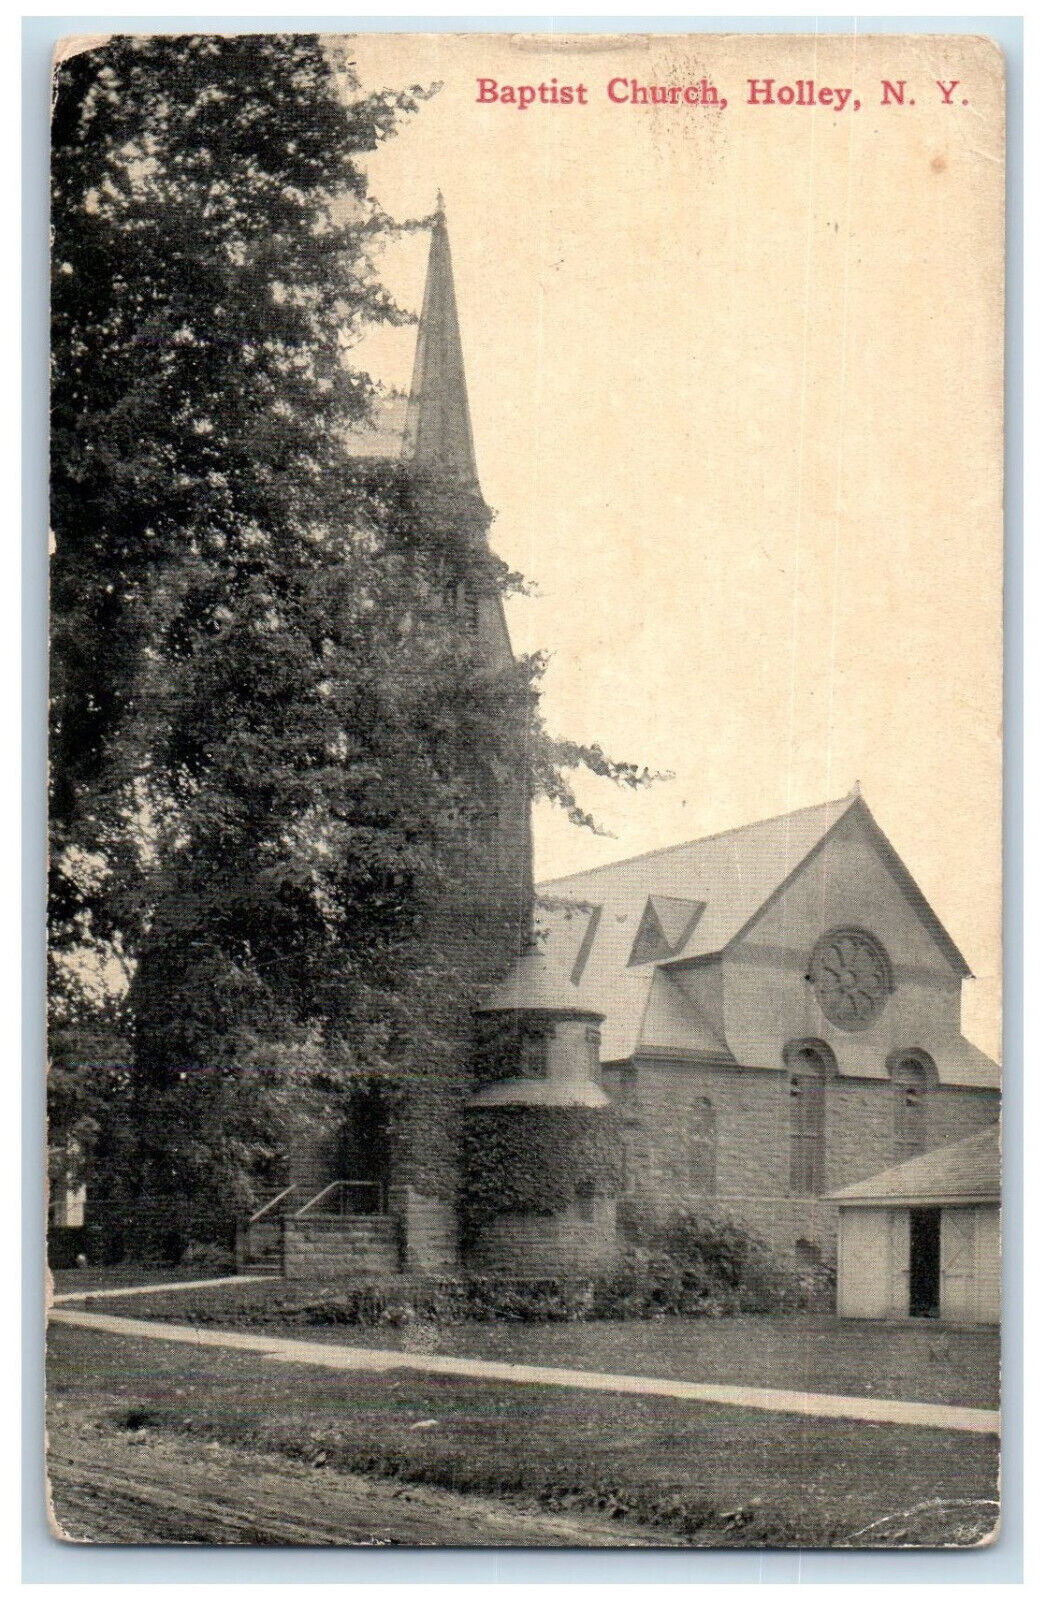 1917 Baptist Church Orleans Co. Holley New York NY Antique Postcard